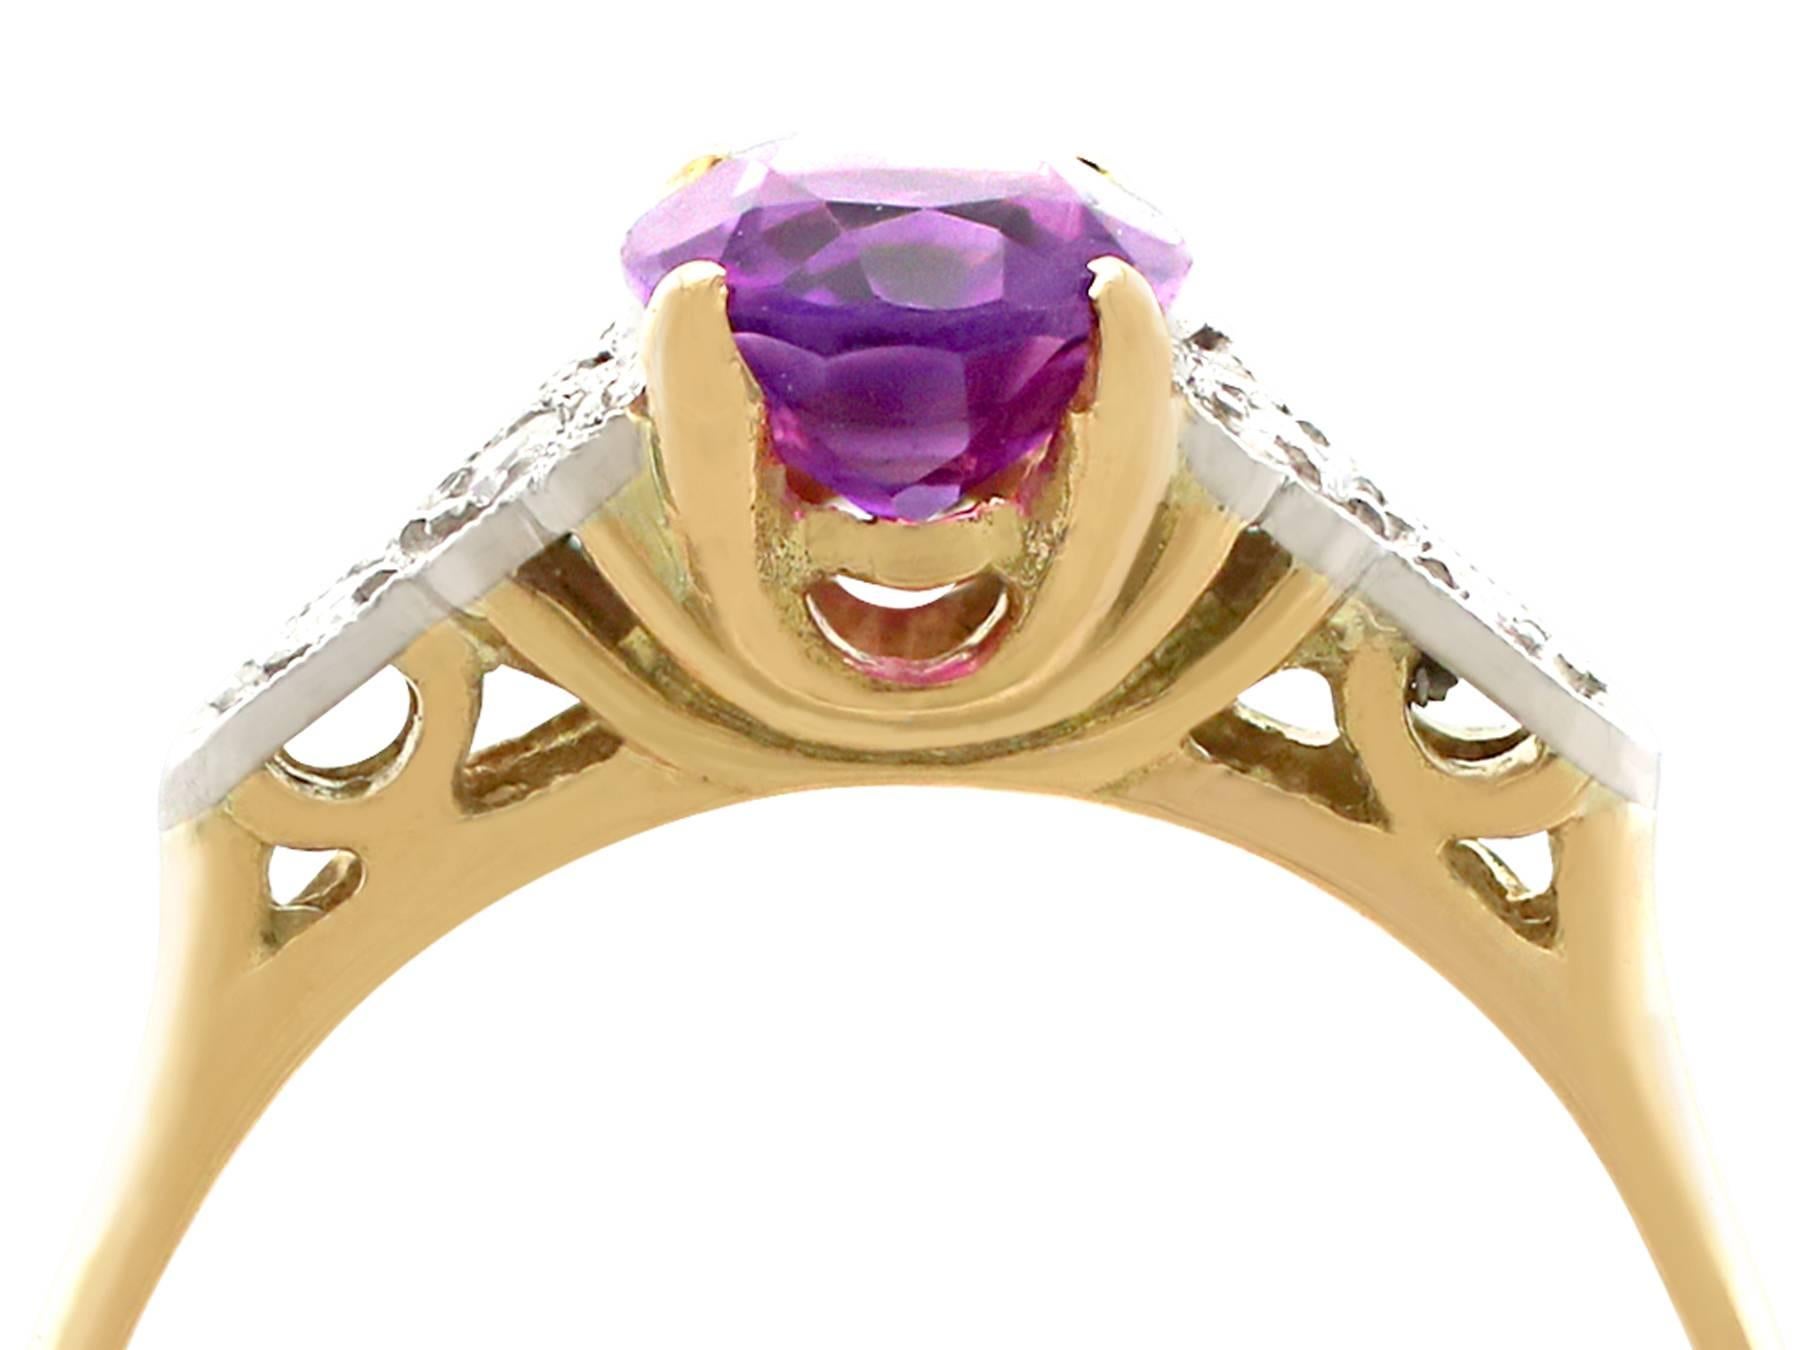 An impressive antique 1.10 carat amethyst and 1.10 carat diamond, 18 karat yellow gold and 18 karat white gold set dress ring; part of our diverse antique jewelry collections

This fine and impressive amethyst dress ring has been crafted in 18k